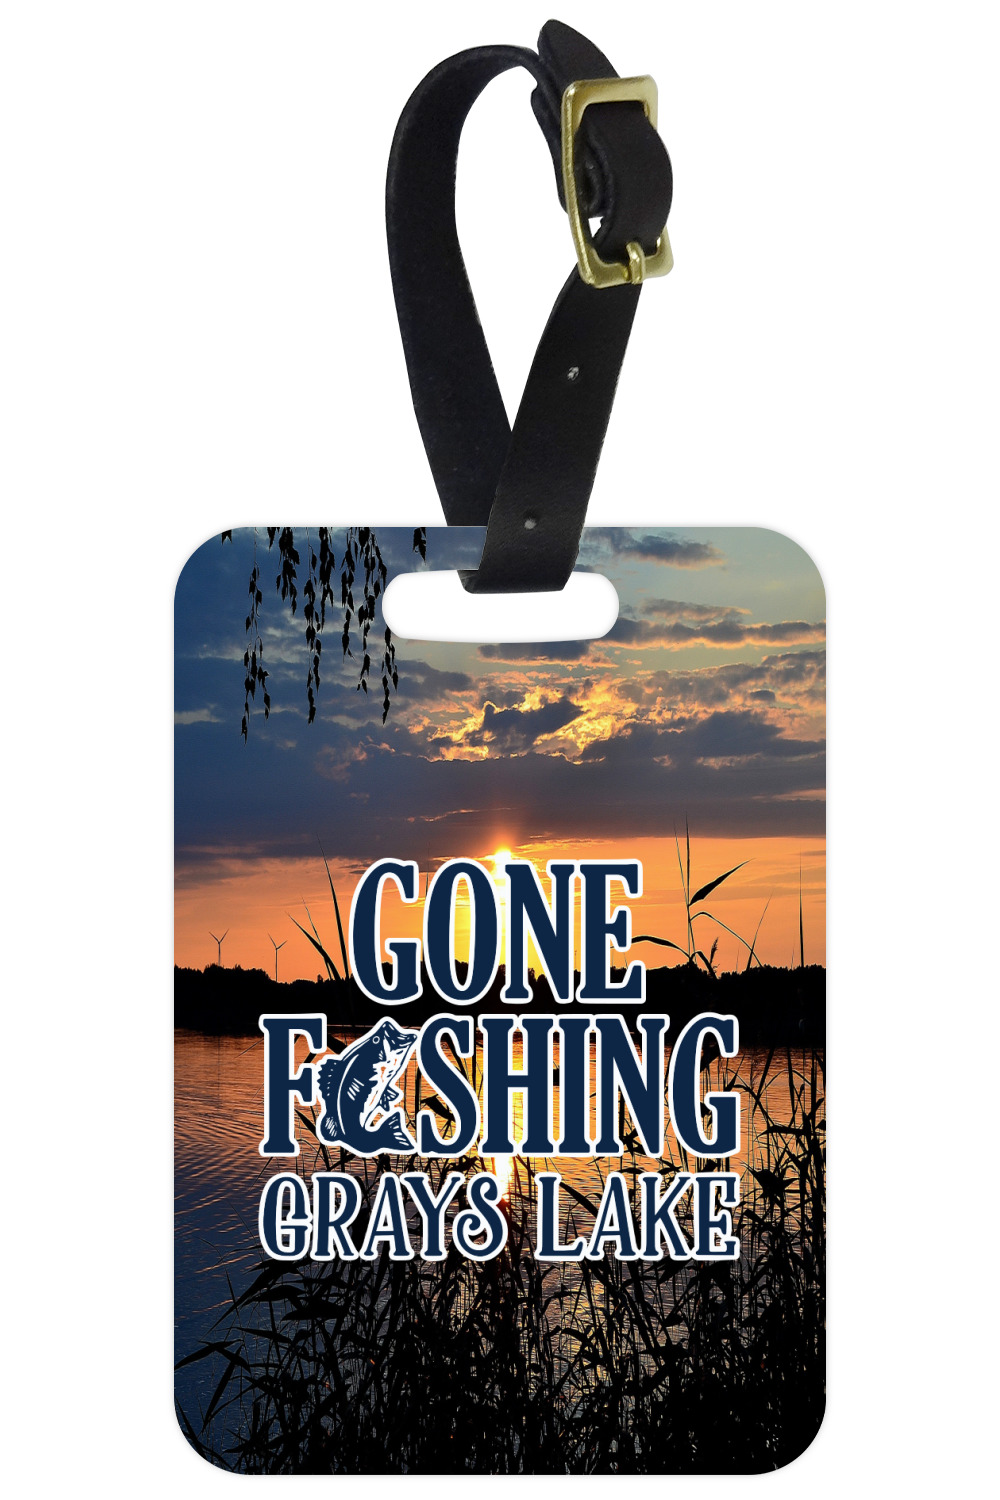 https://www.youcustomizeit.com/common/MAKE/1038229/Hunting-Fishing-Quotes-and-Sayings-Aluminum-Luggage-Tag-Personalized.jpg?lm=1670601252